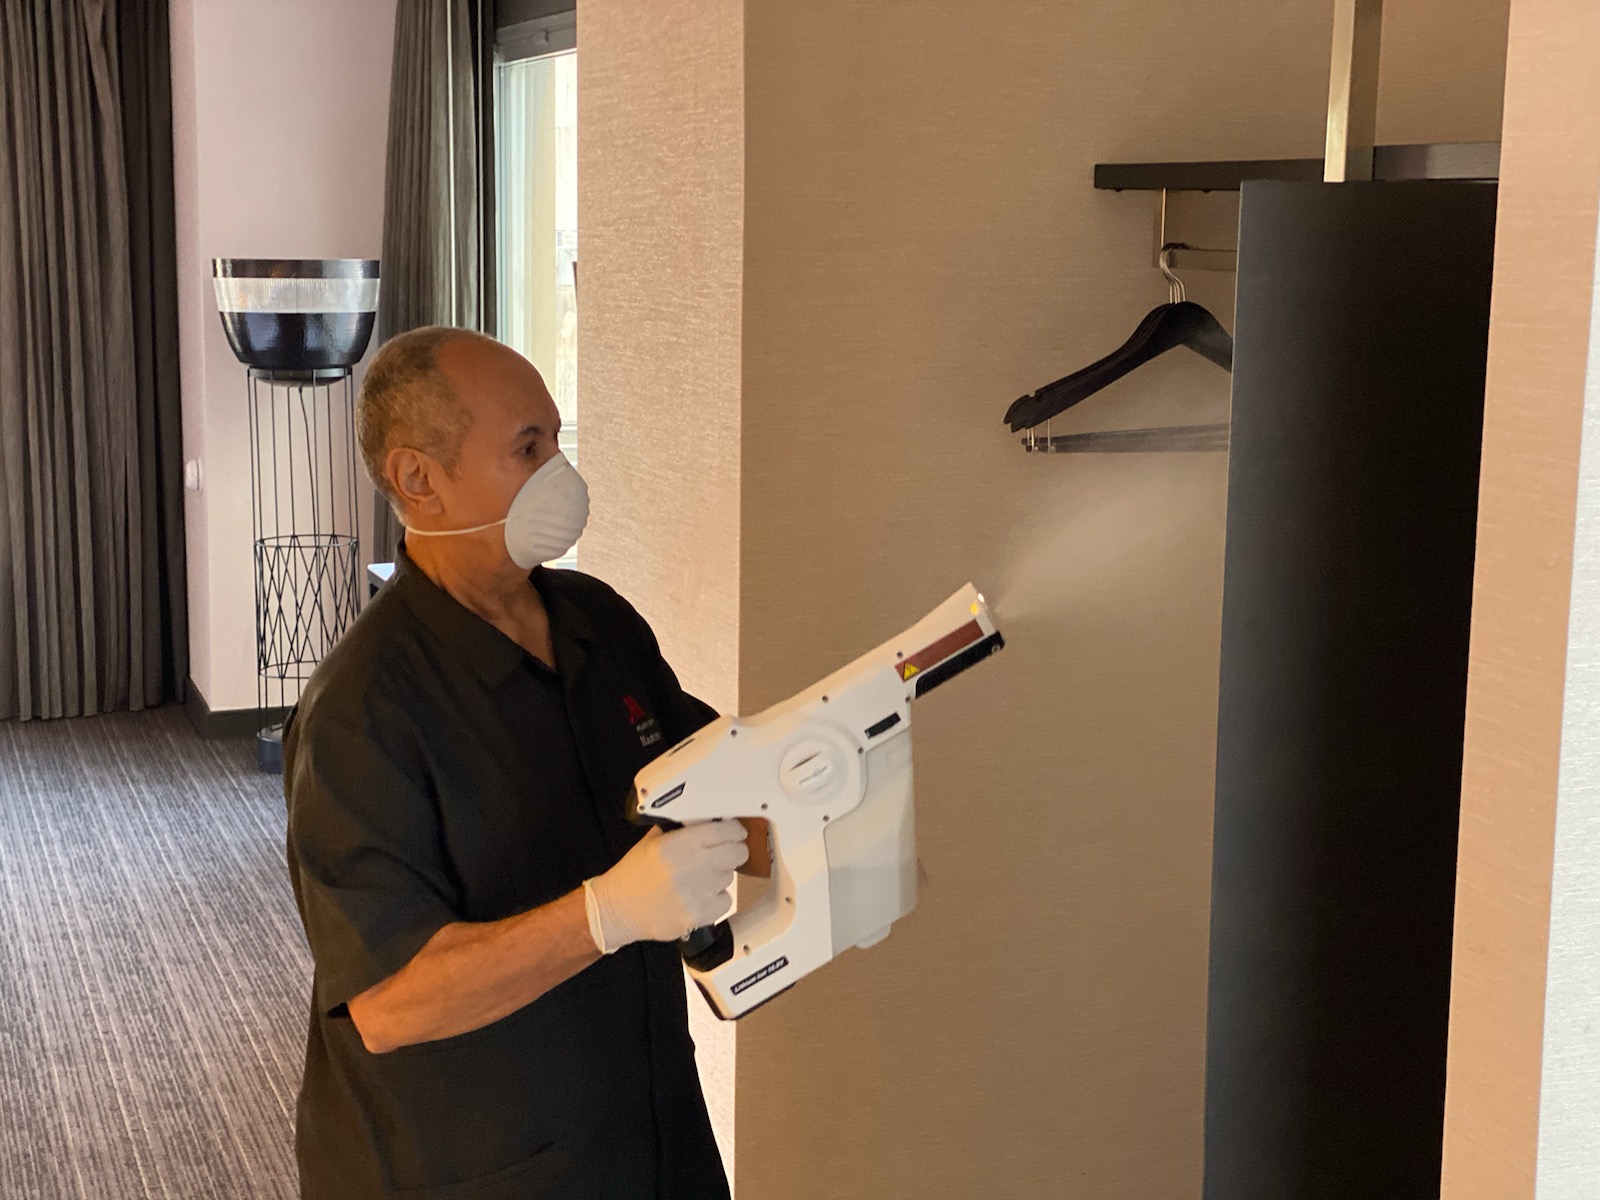 Marriott's Global Cleanliness Council